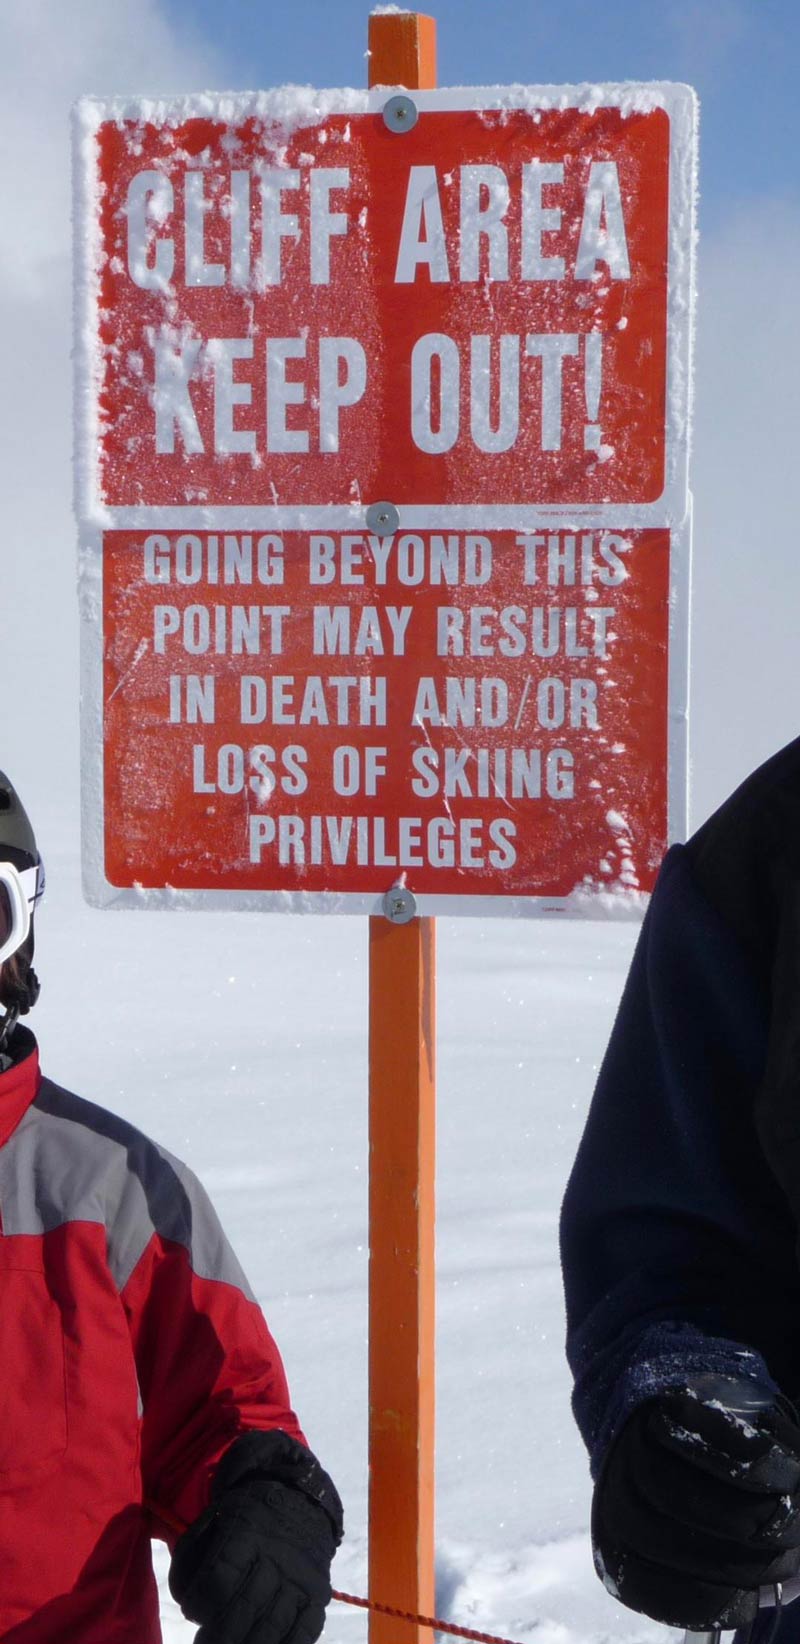 Death and loss of skiing privileges is taking it too far